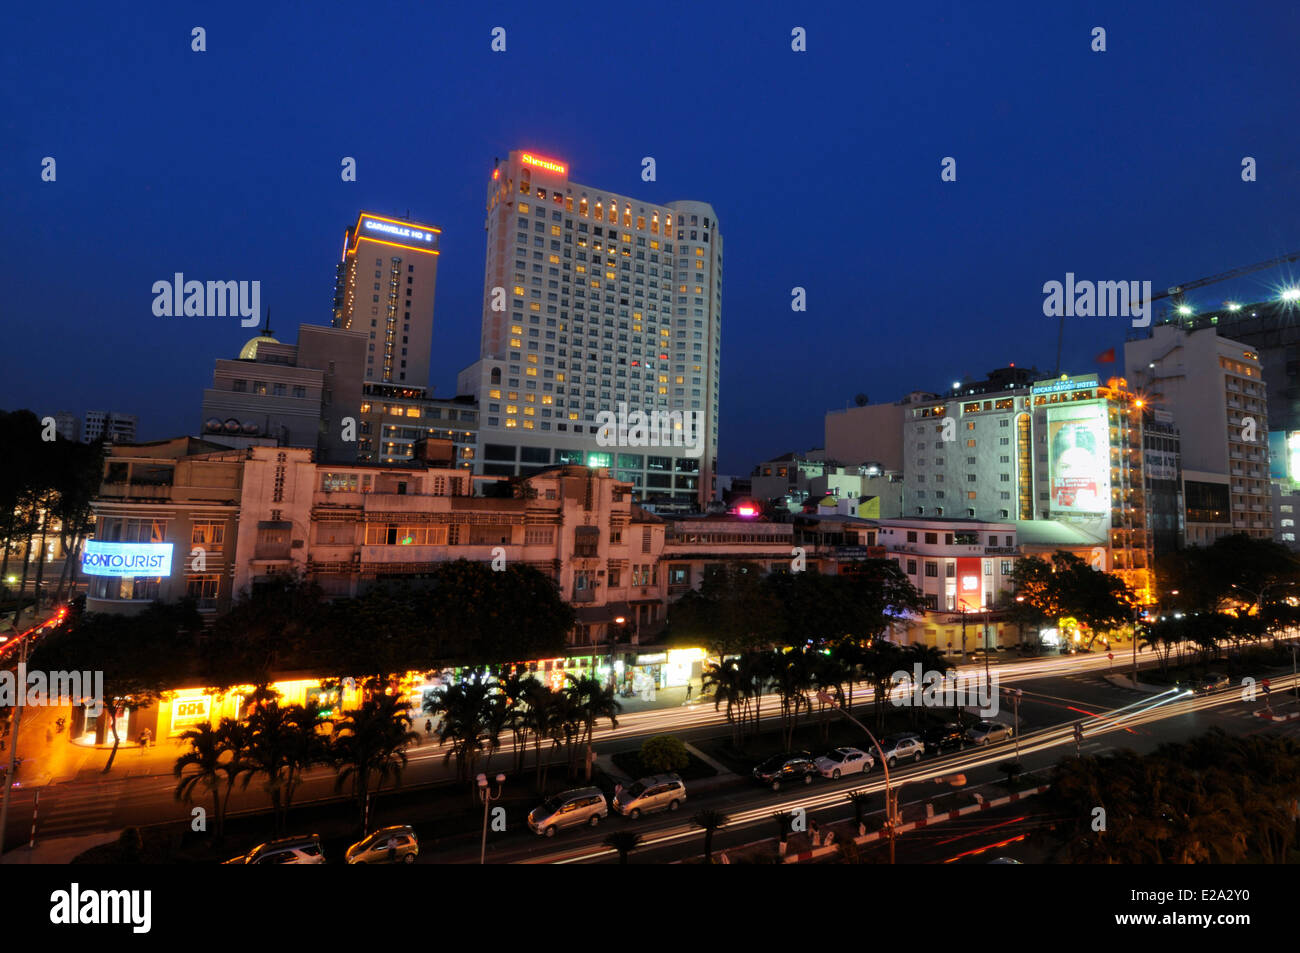 Vietnam, Saigon (Ho Chi Minh City), district 1, the Caravelle hotel and the Sheraton hotel Stock Photo